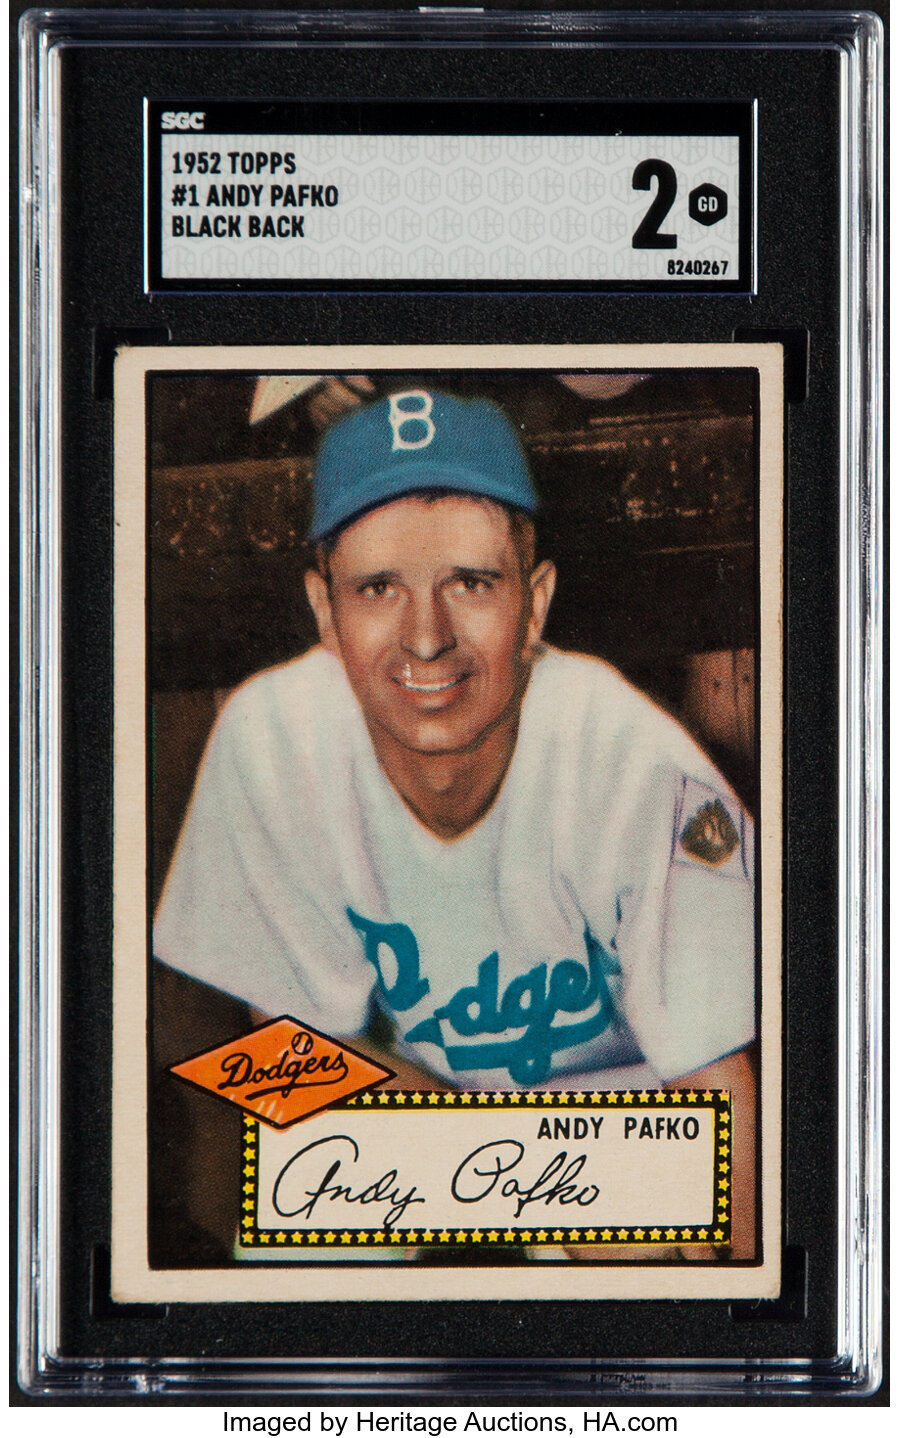 1952 Topps Andy Pafko (Black Back) #1 SGC Good 2